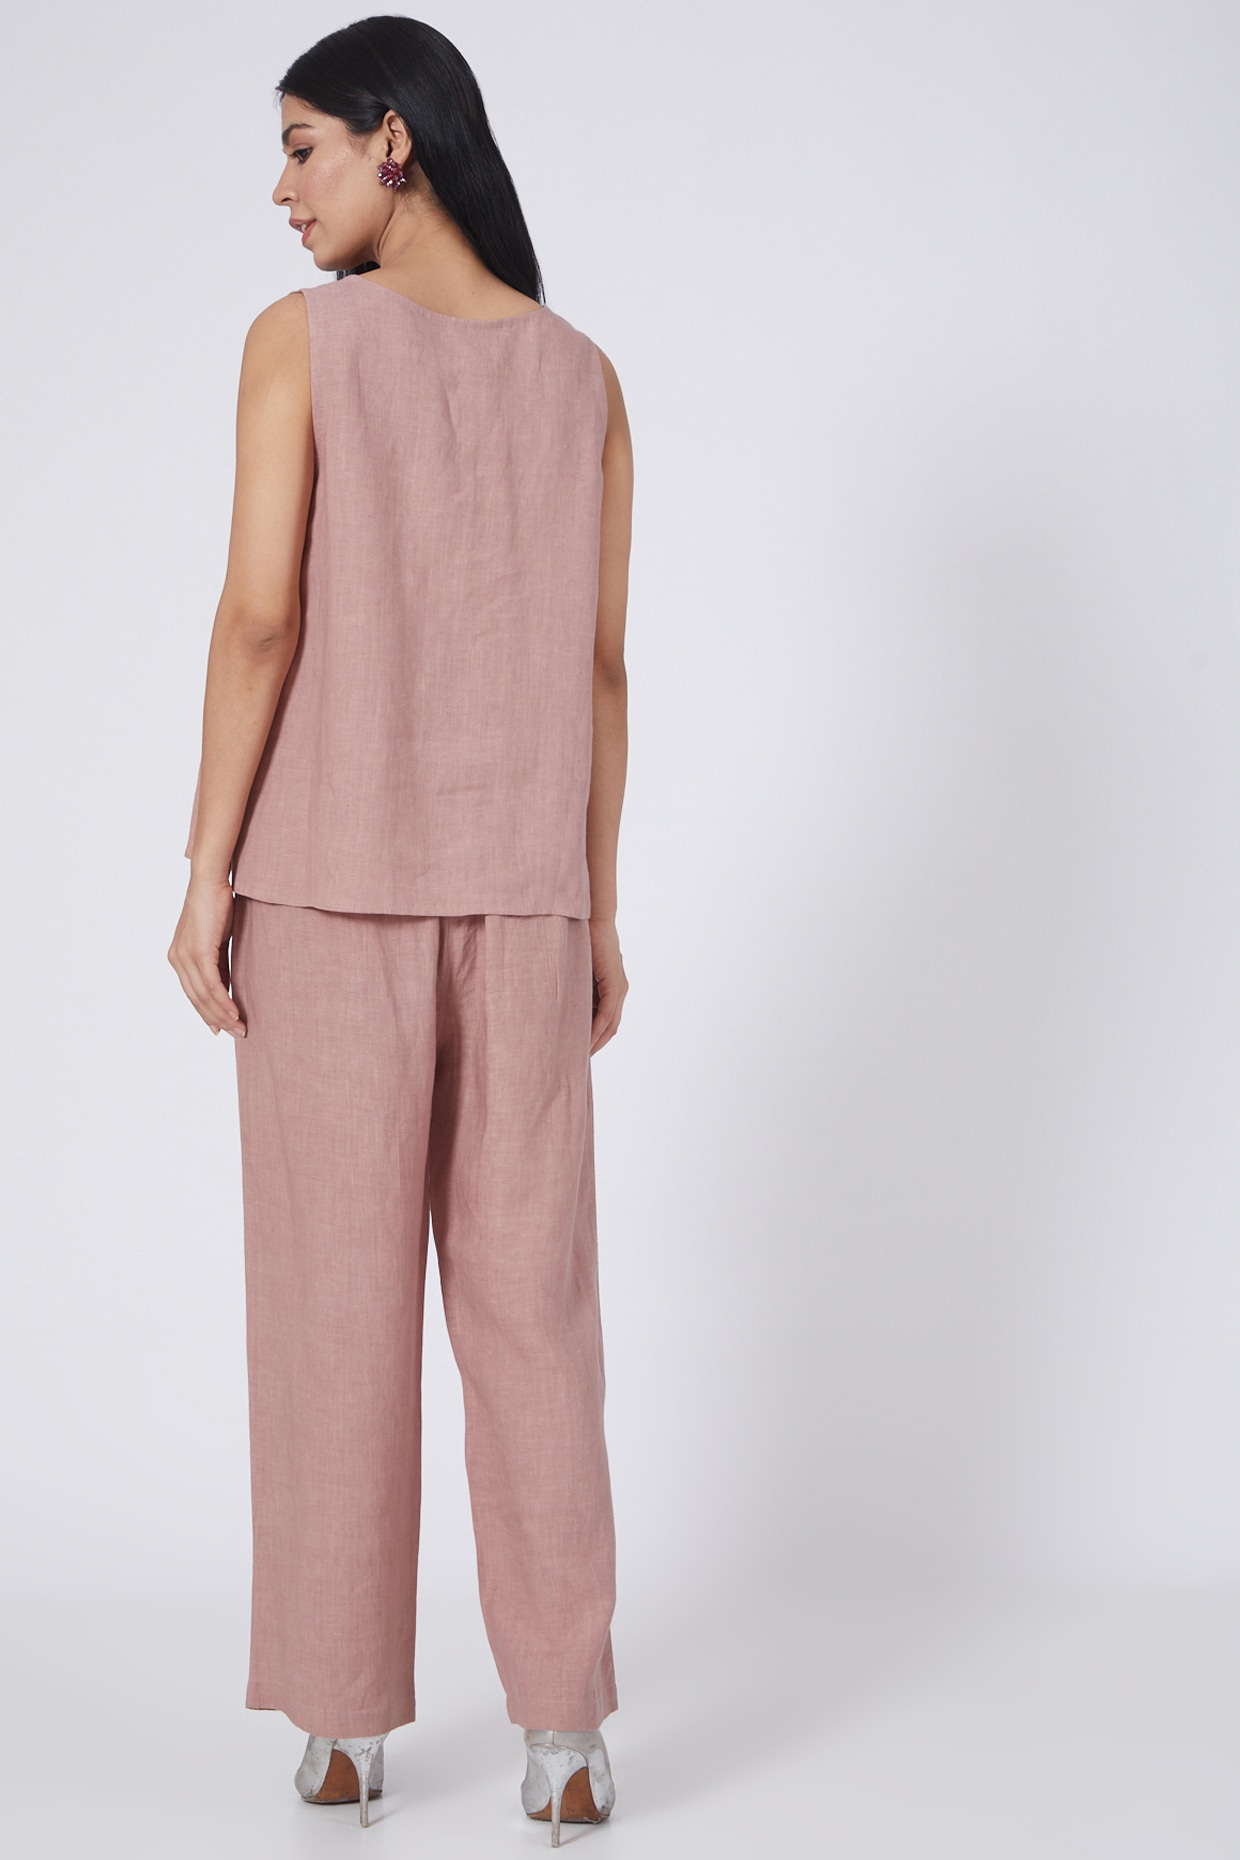 Pink Viscose Blend Trousers with Drawstring Fastening – Forma Brand